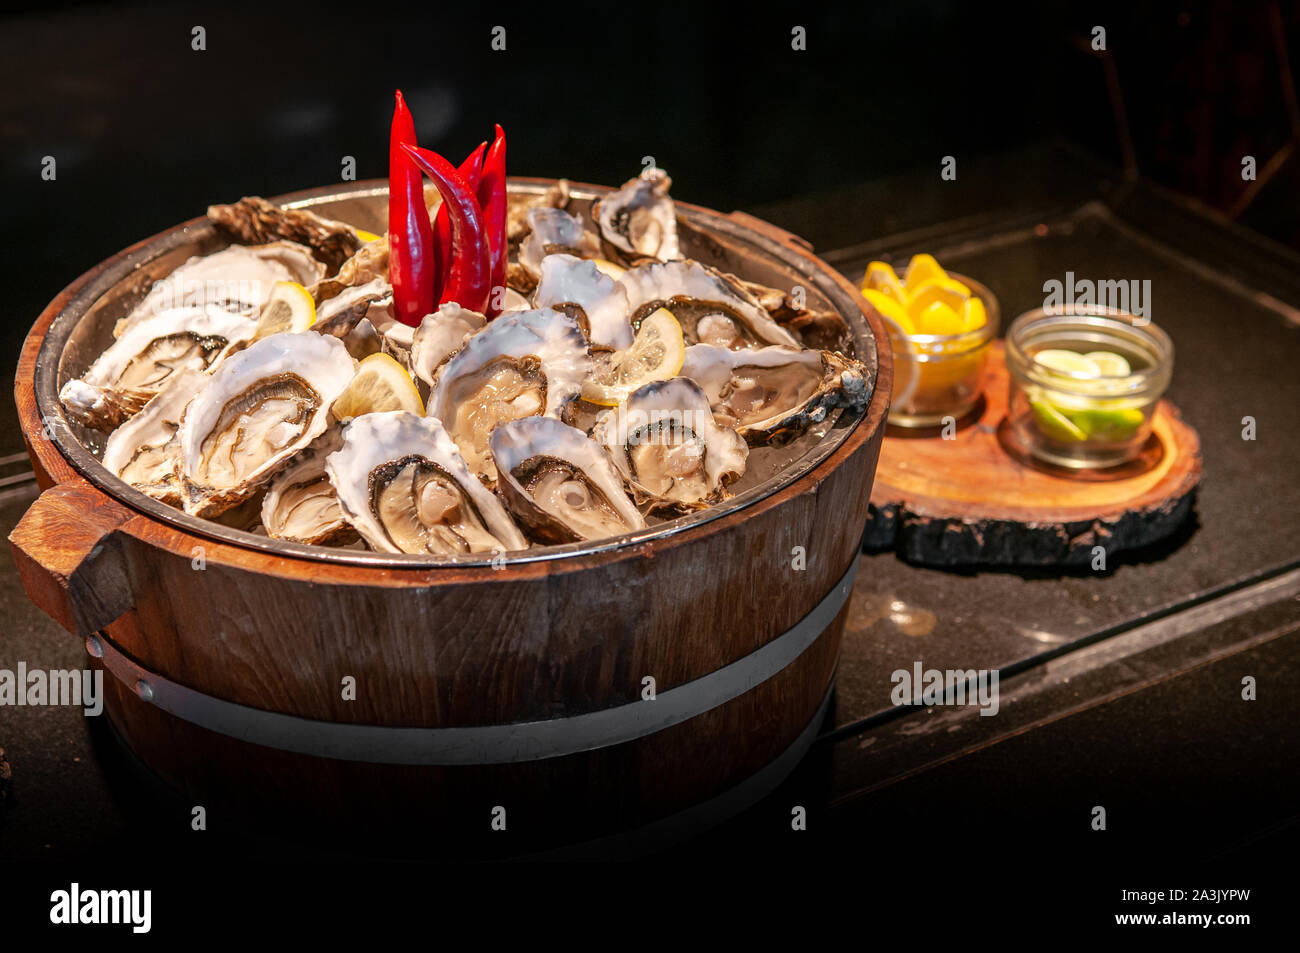 Fresh whole marine Fine de claire oysters in oak wood bucket with lime and lemon - dark tone food image Stock Photo